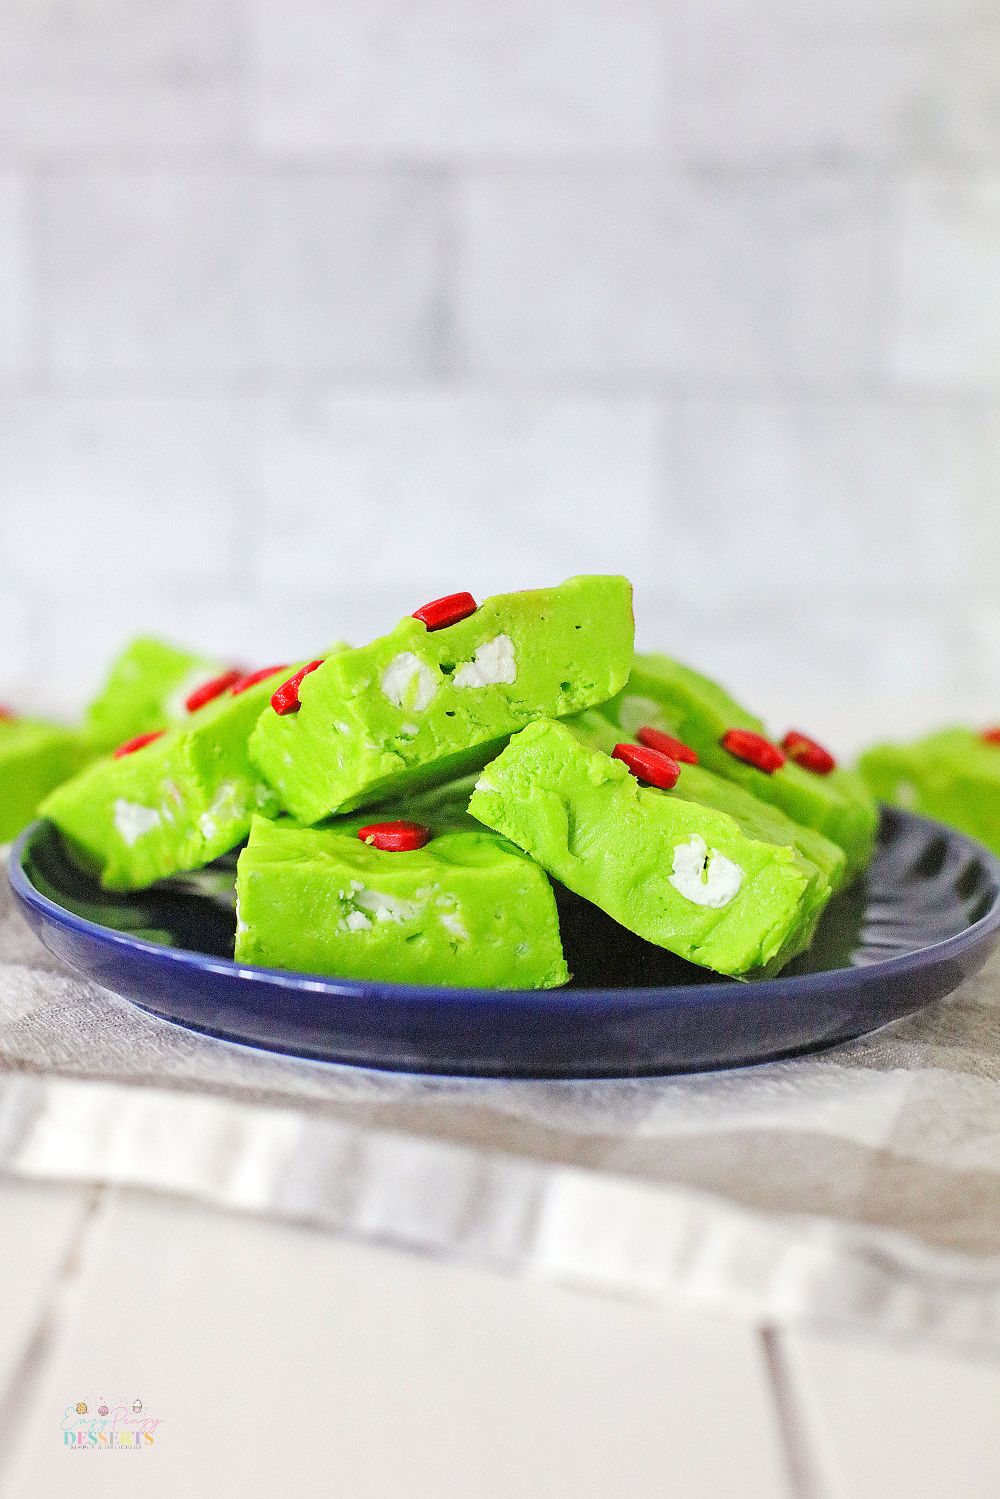 Green Christmas fudge with red heart candy and white marshmallows